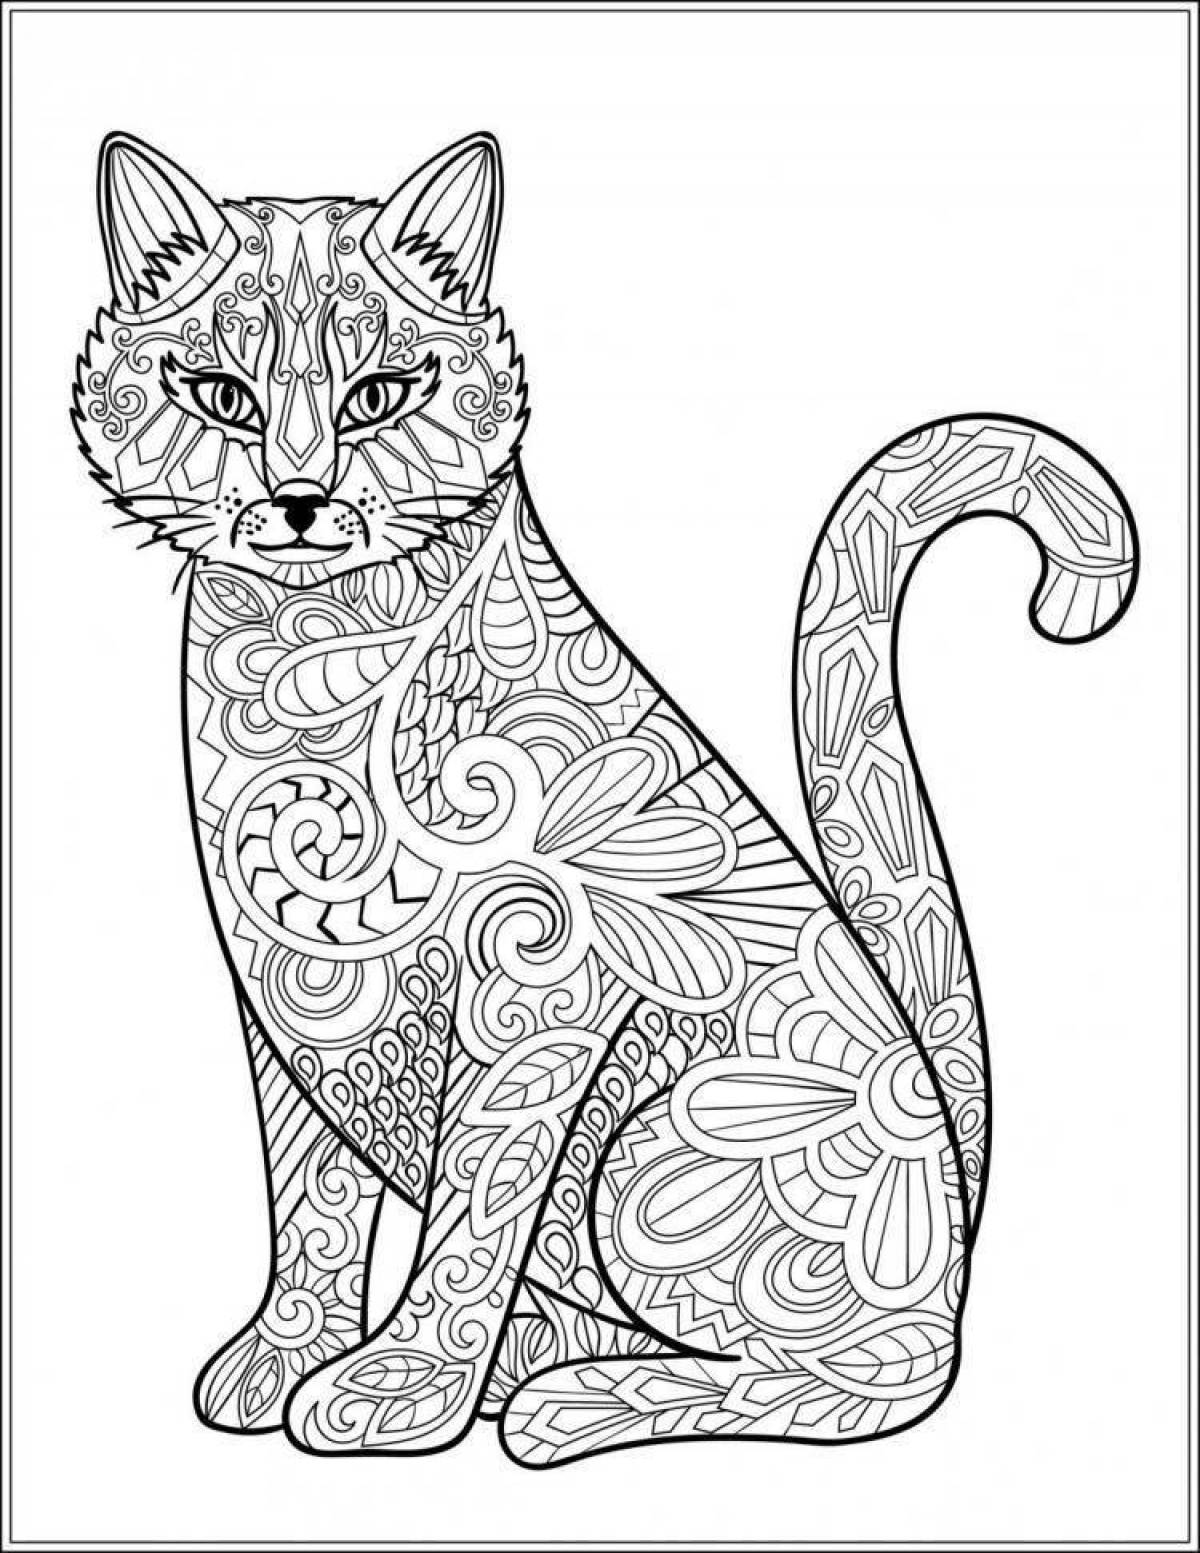 Coloring glowing cat antistress